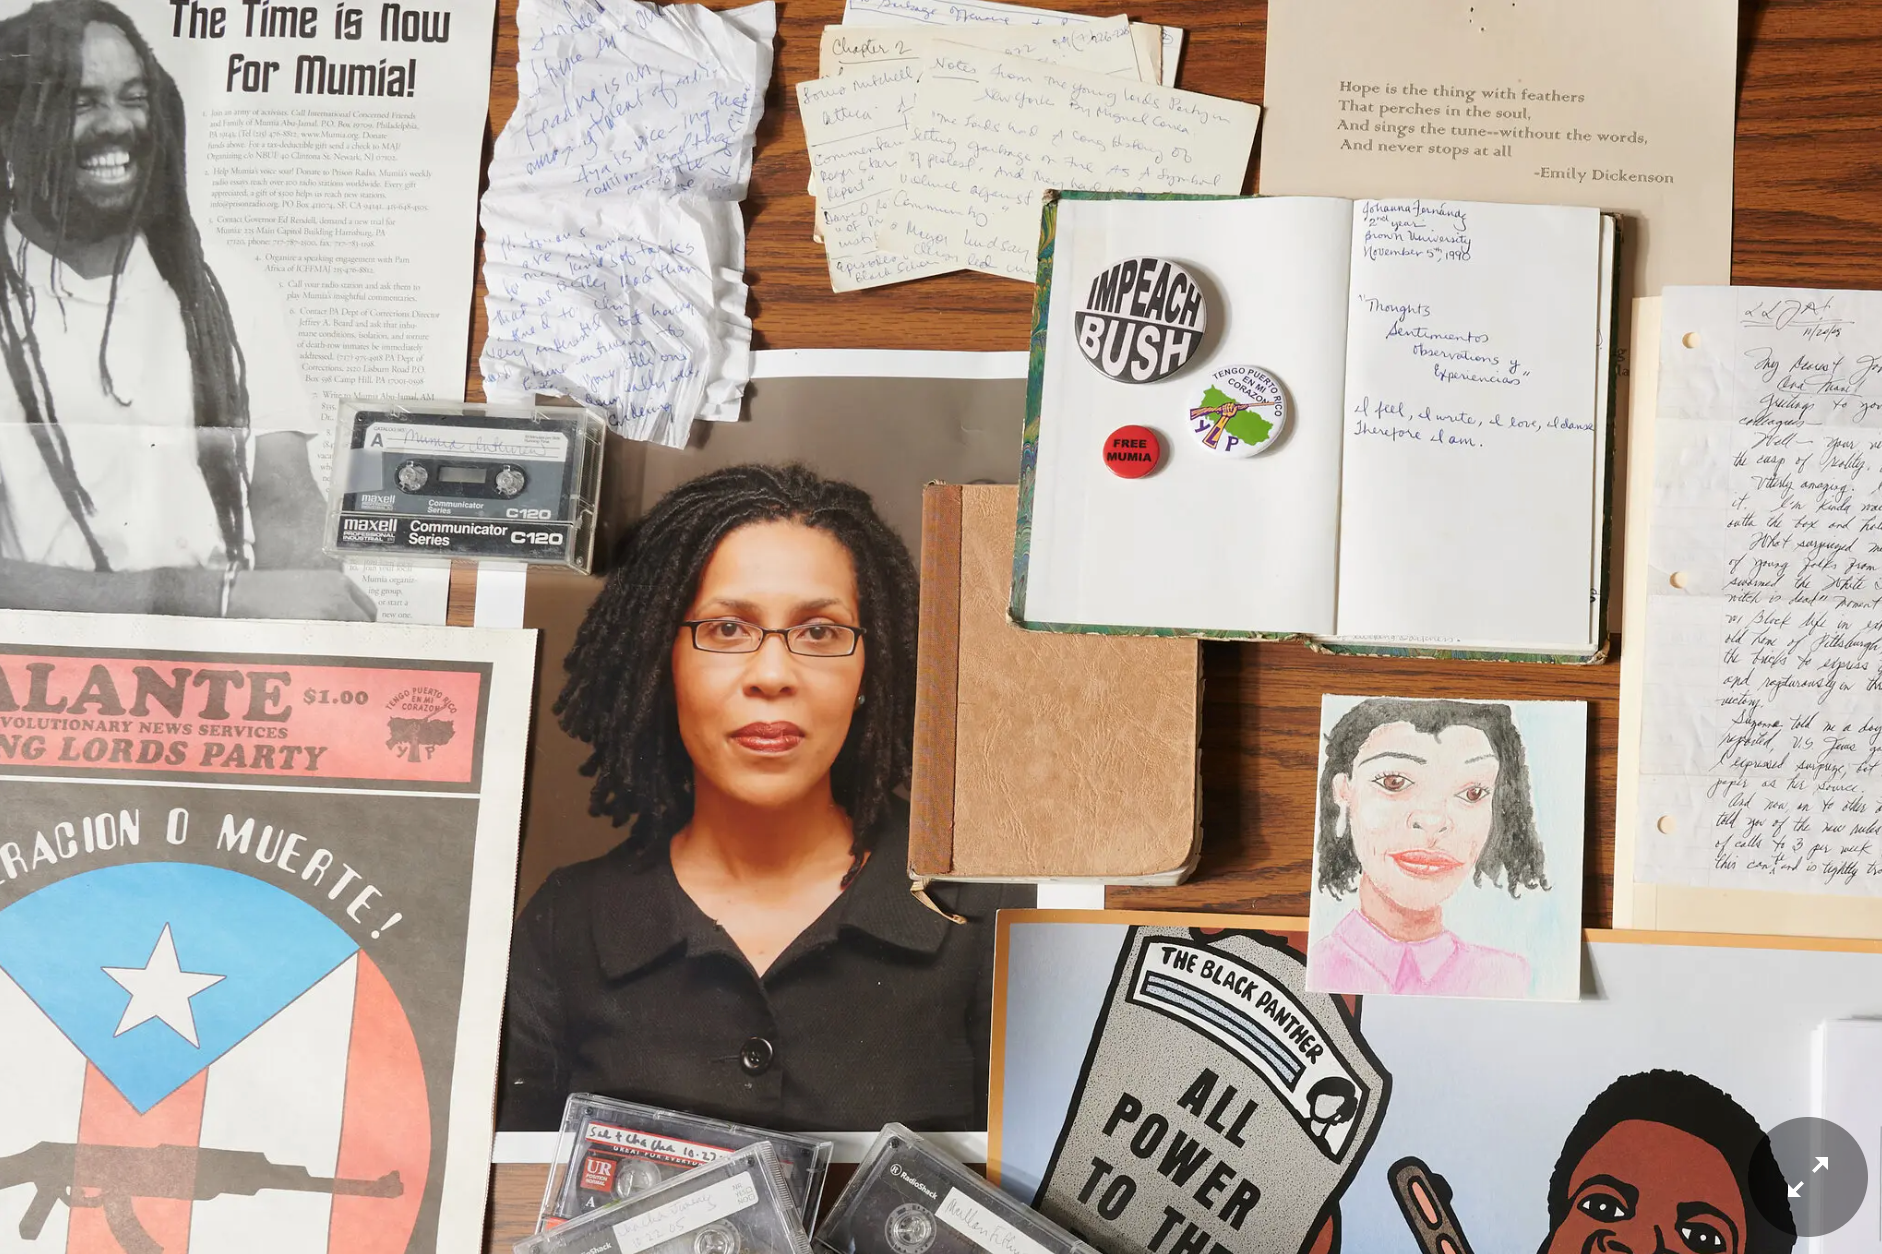 Some archival items of Mumia Abu-Jamal. Image by Phillip Keith for The NY Times. 